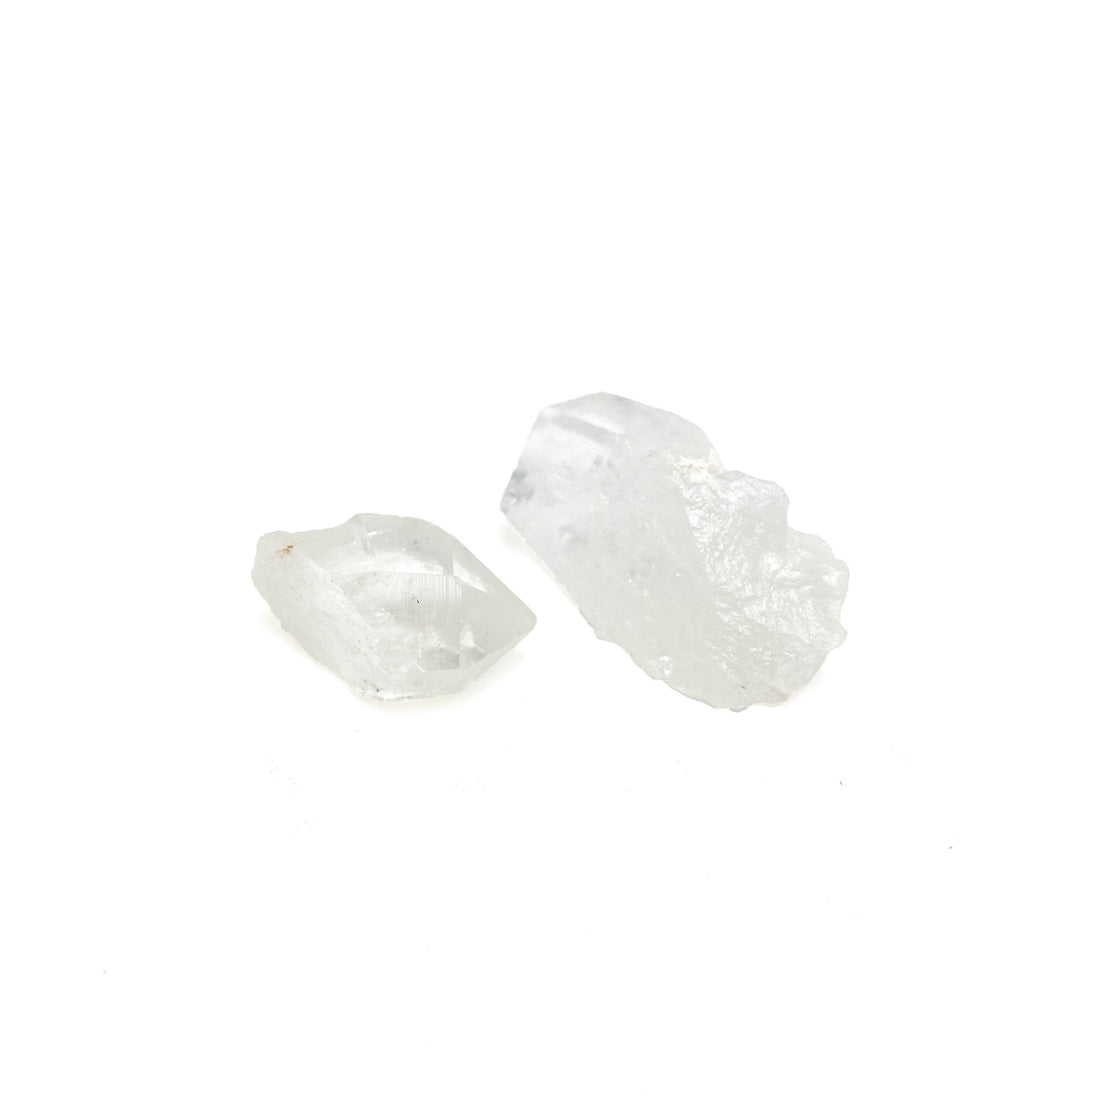 Lemurian Raw Points Lemurian Seed Crystals A. $2.00 